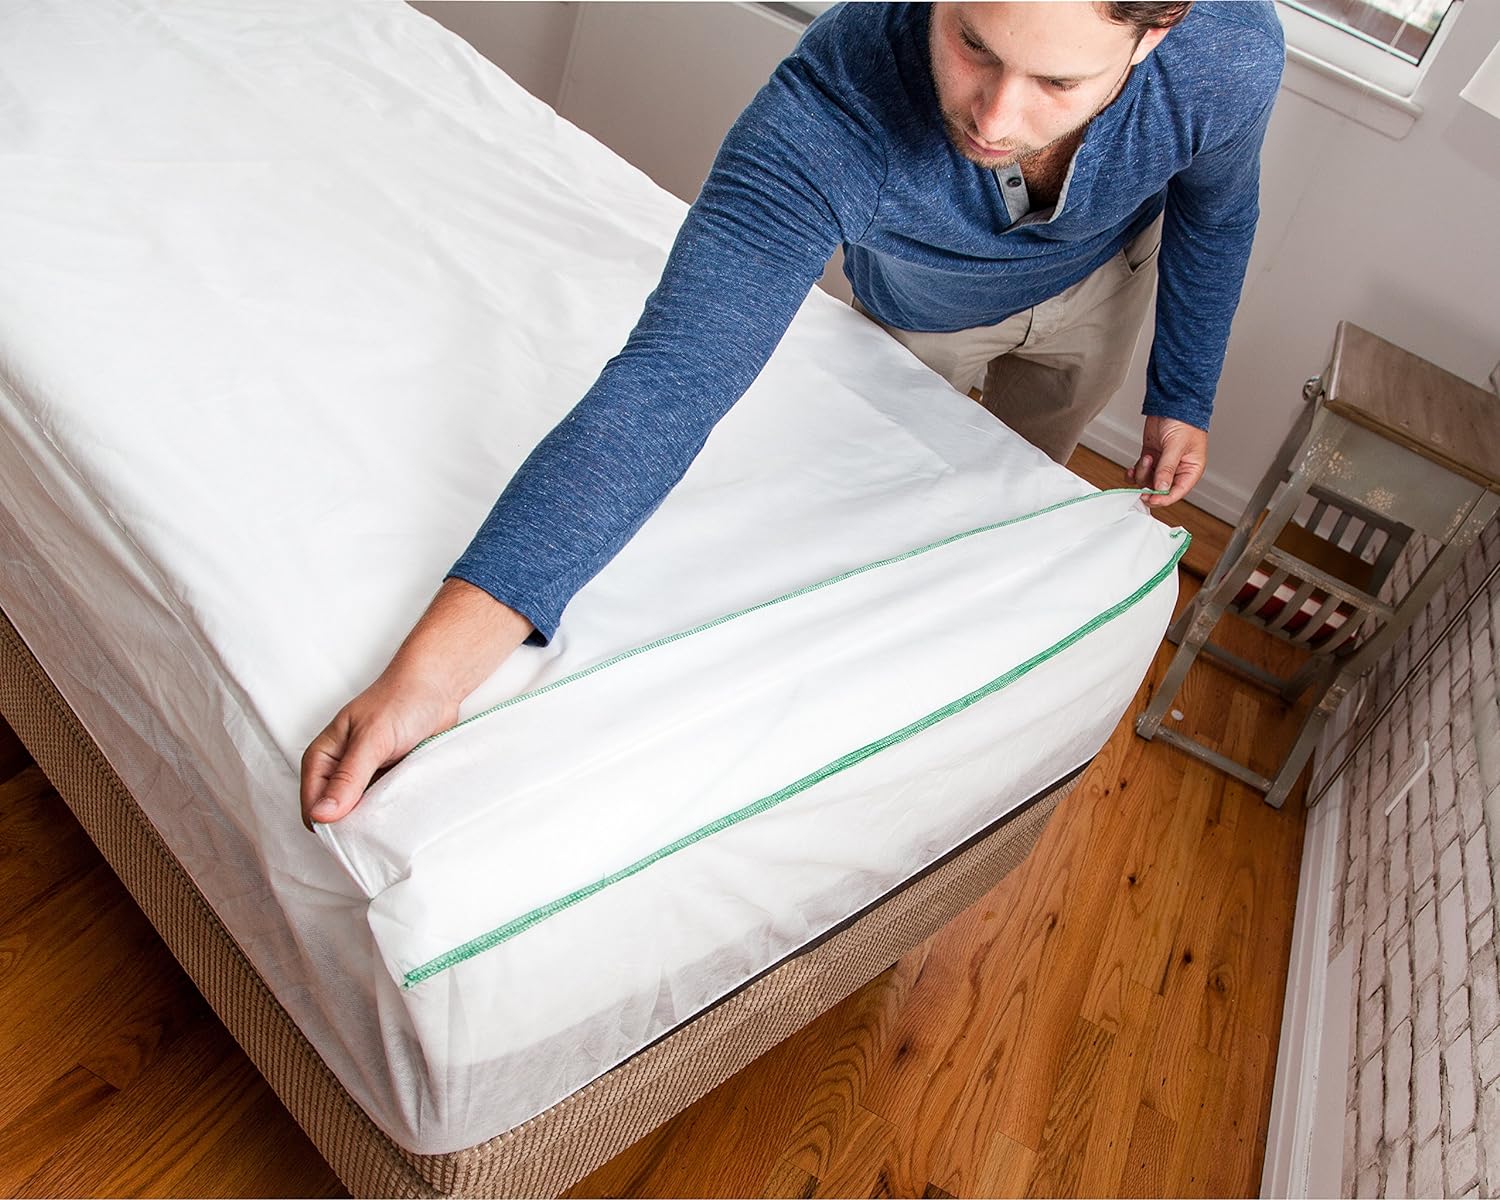 Waterproof Disposable Bed Sheets for Homecare & Caregiving